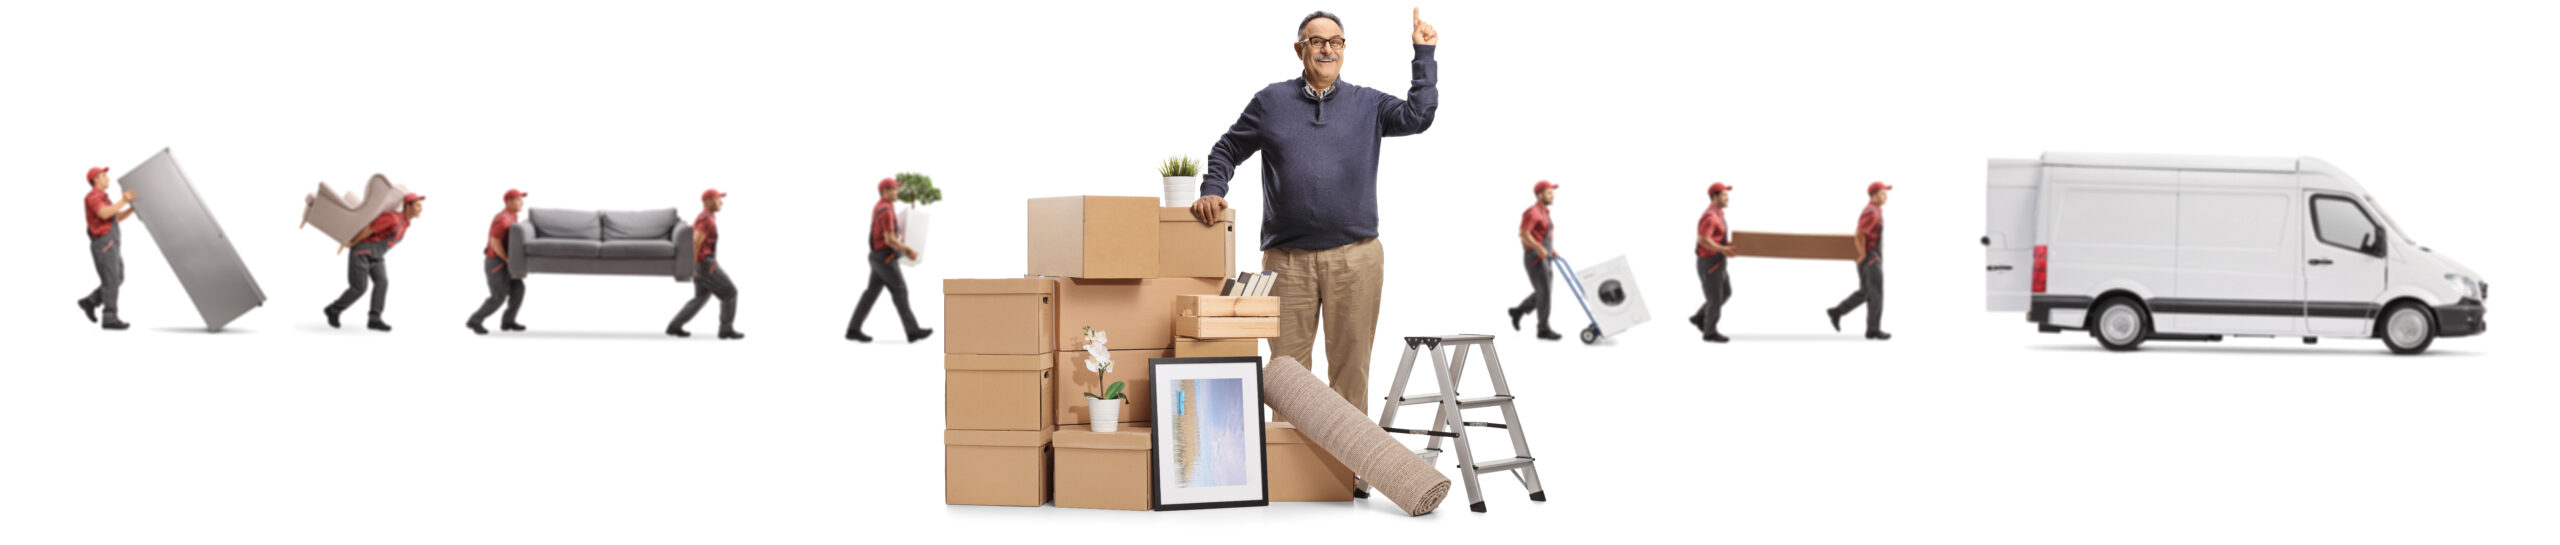 Mature man with a pile of cardboard boxes pointing up and worker